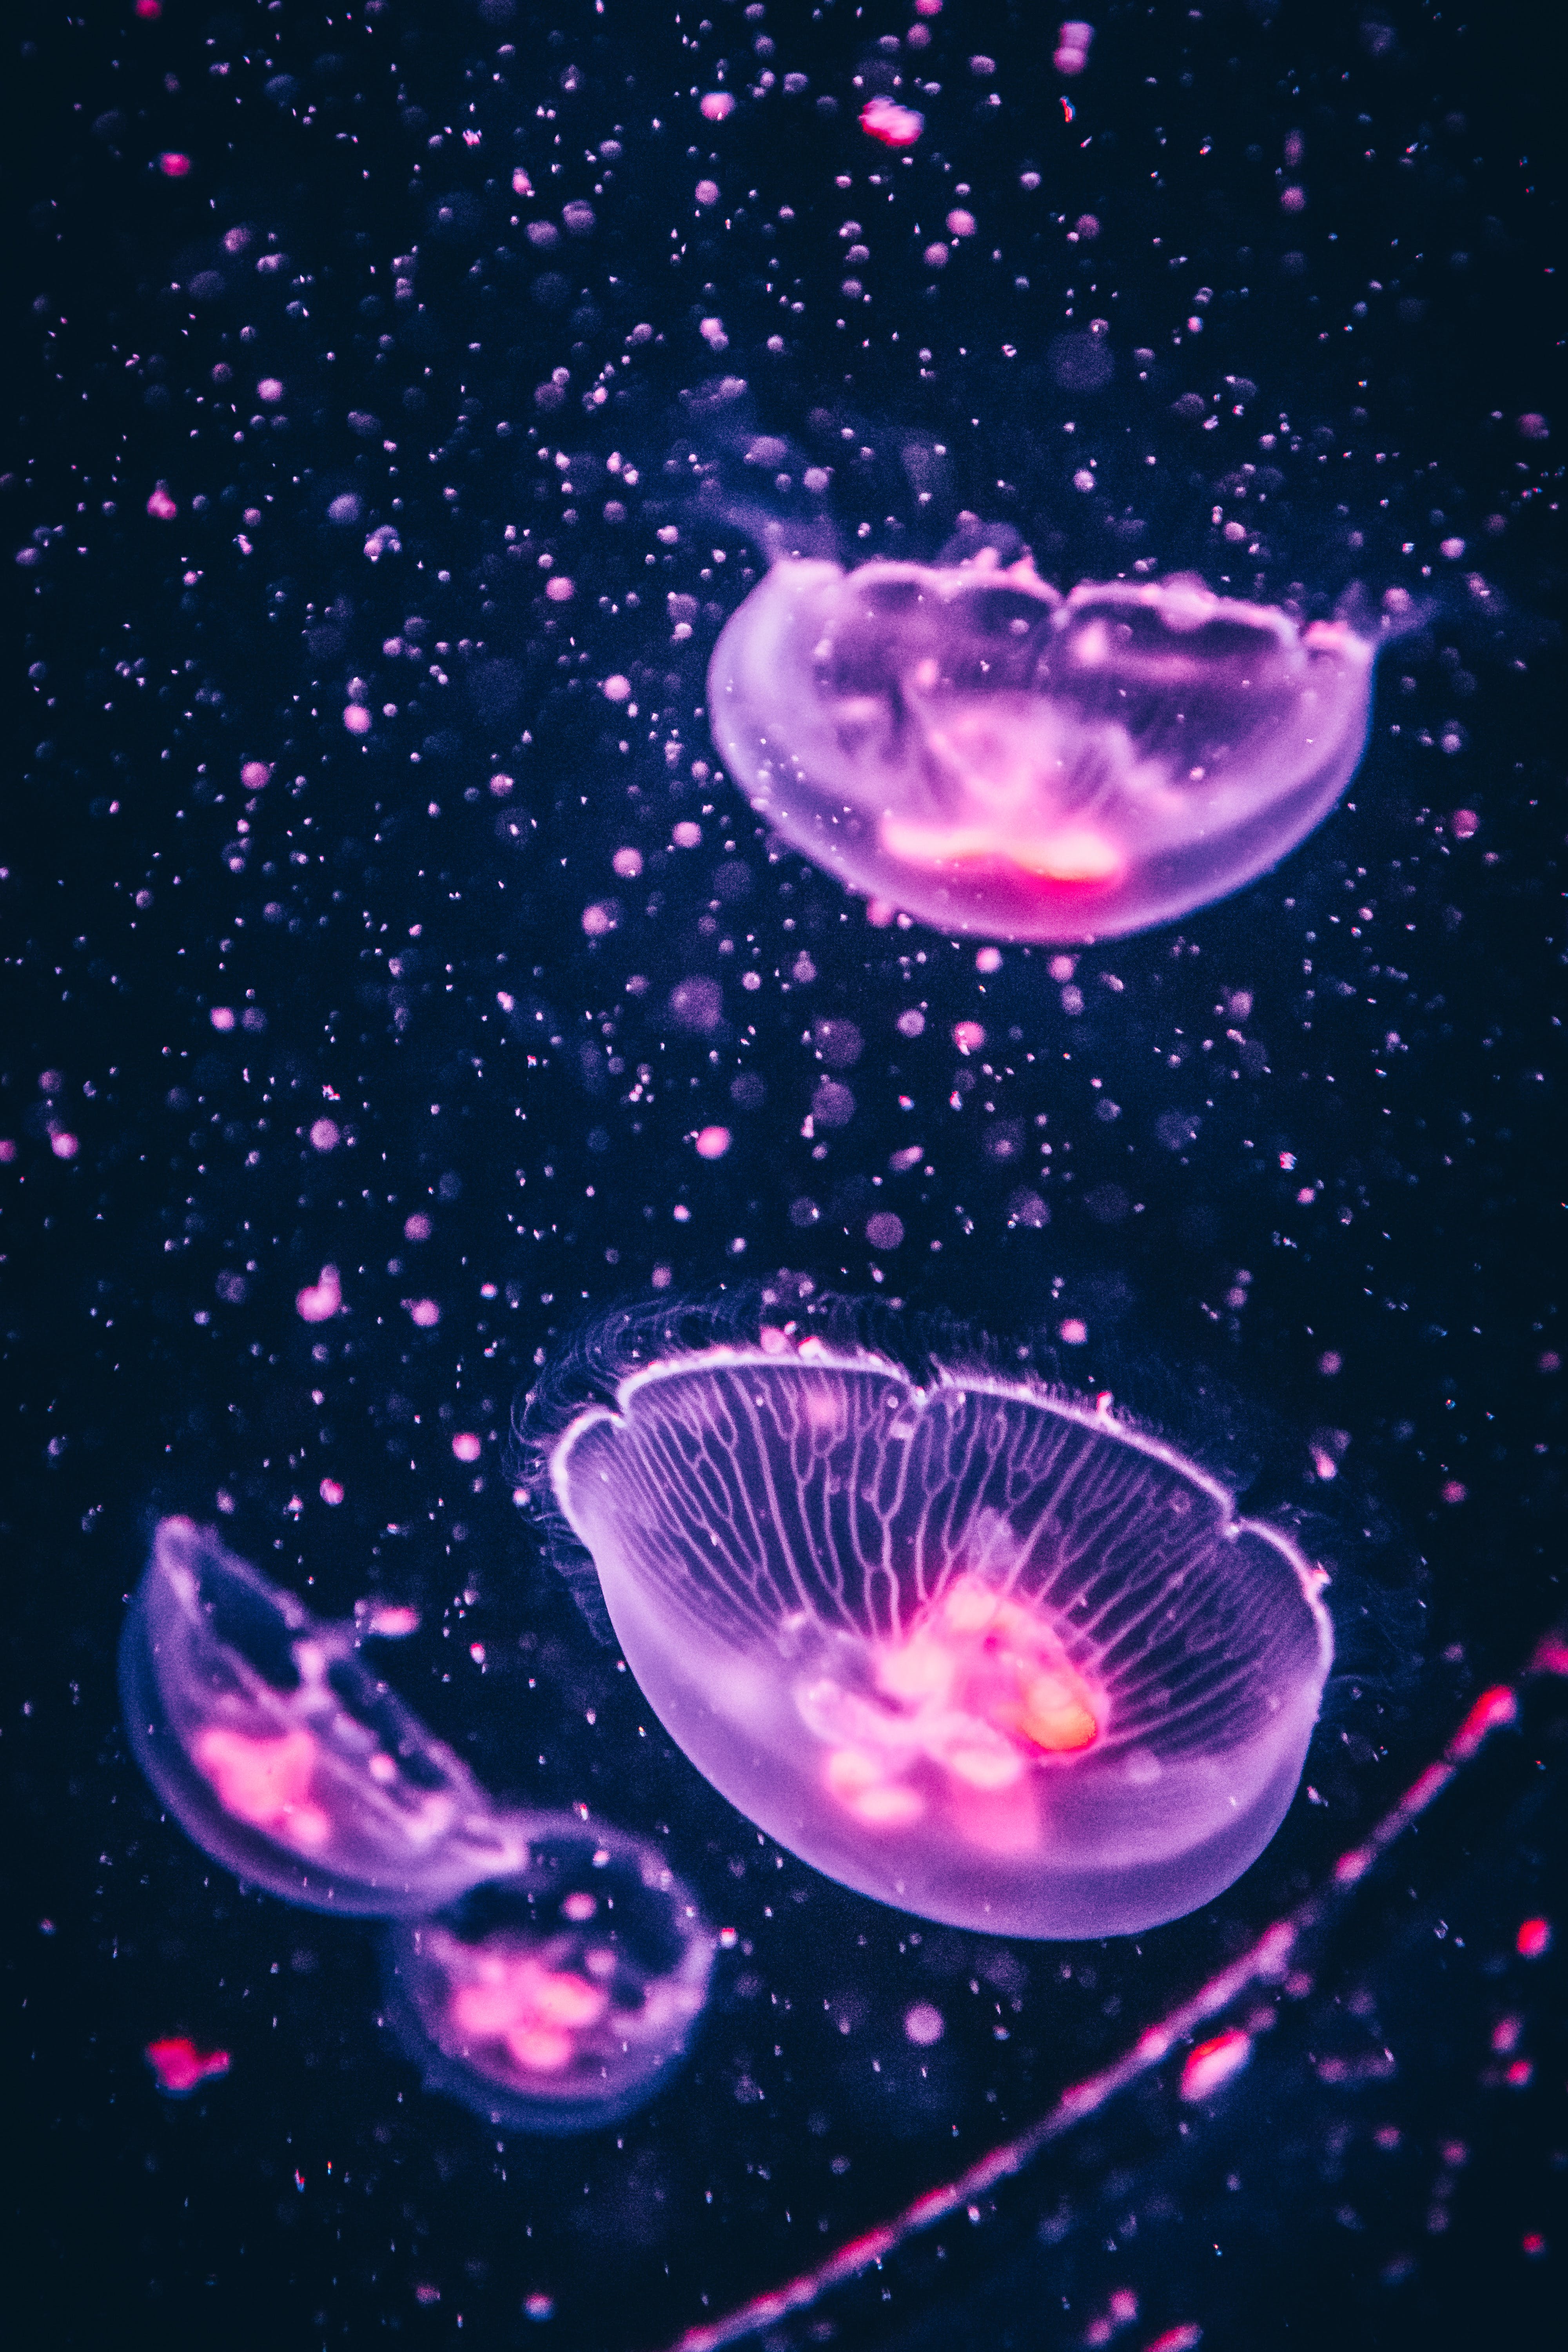 A group of jellyfish floating in the water - Jellyfish